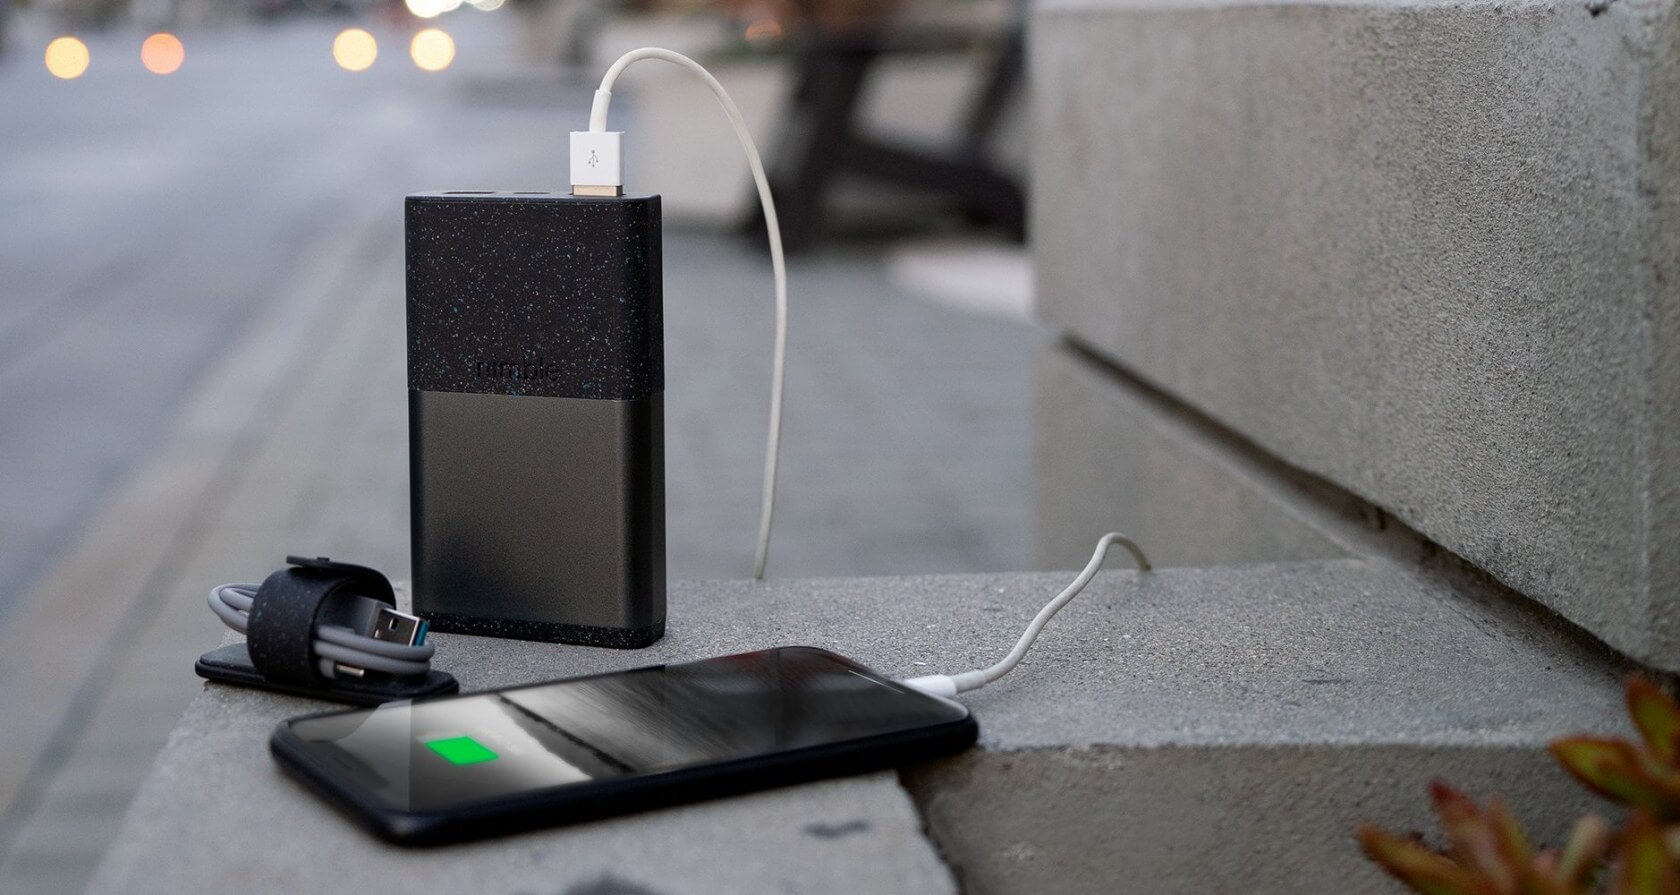 Former Mophie execs launch eco-friendly mobile accessory startup